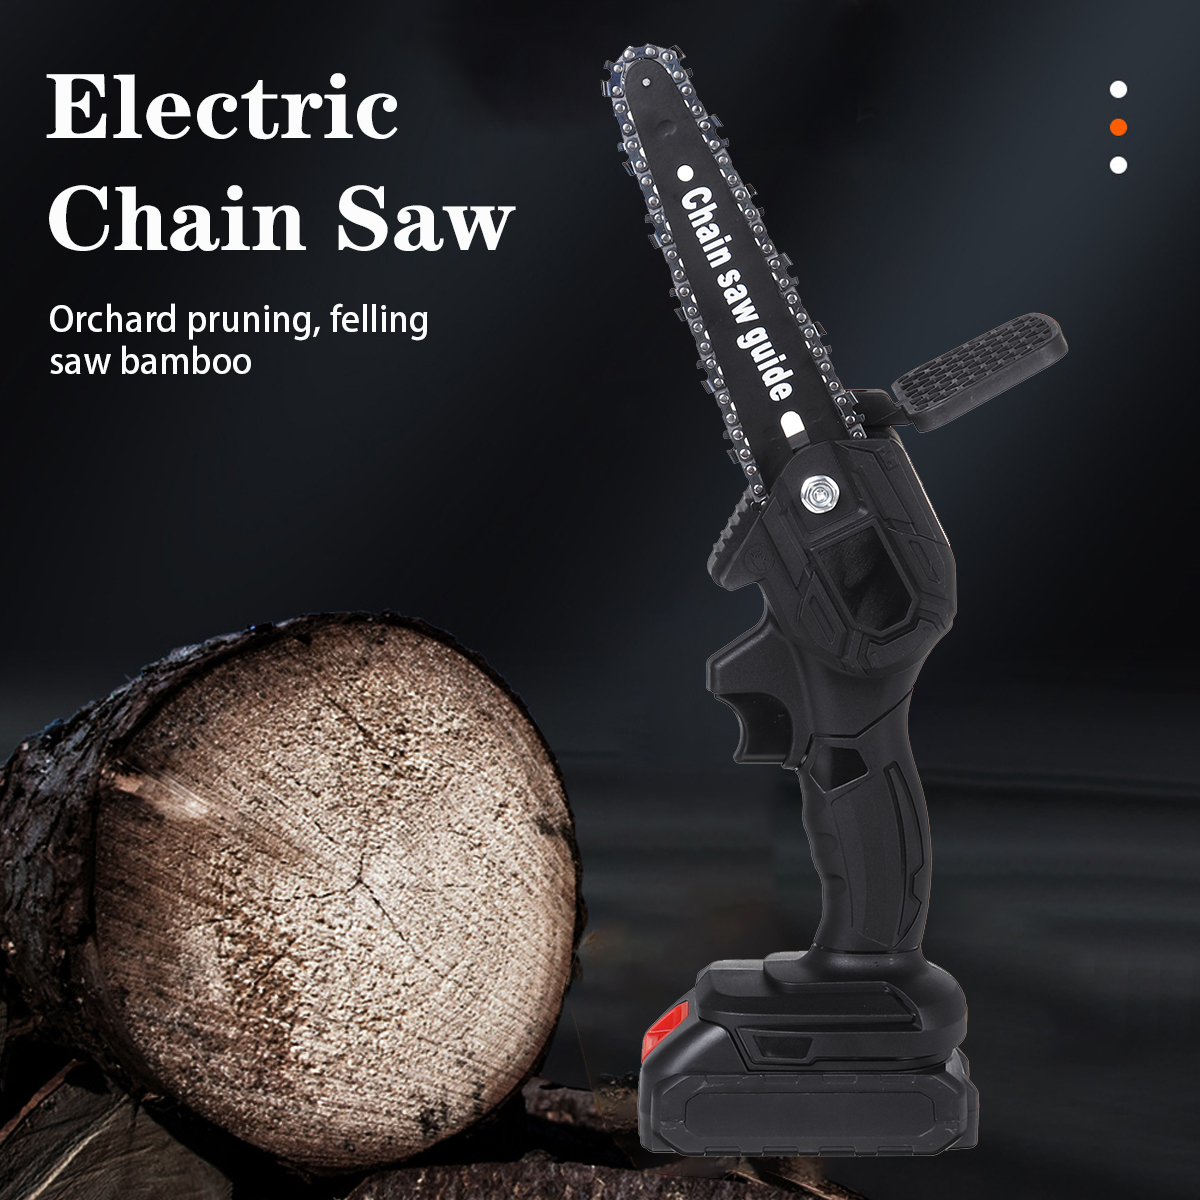 Doersupp-550W-Cordless-Electric-Chain-Saw-6-Inch-Mini-Wood-Cutter-Chainsaw-One-Hand-Saws-Woodworking-1789707-1